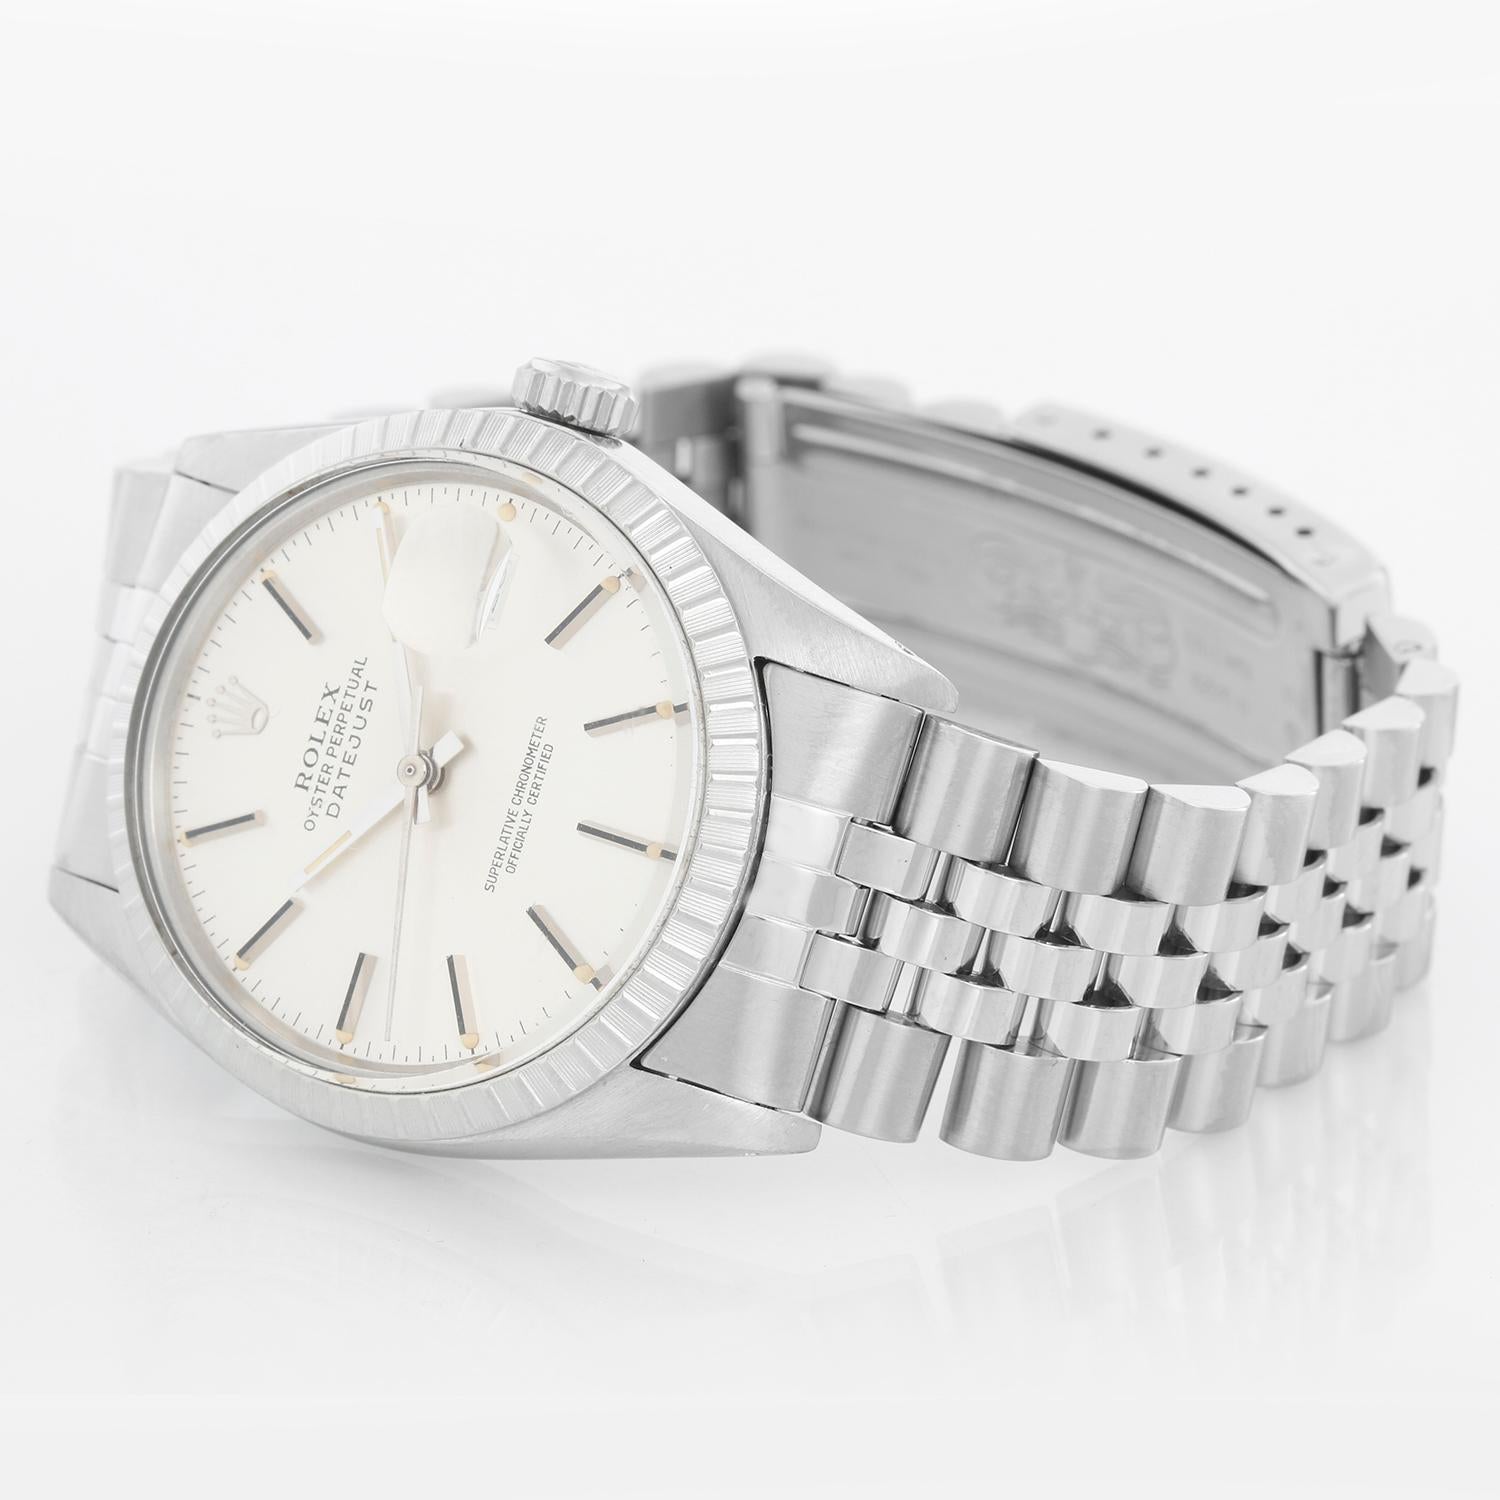 Men's Rolex Datejust Stainless Steel  Watch 16030 - Automatic winding, 27 jewels, Quickset, acrylic crystal. Stainless steel case with fluted bezel ( 36 mm ). Silver dial with stick hour markers. Stainless steel Jubilee bracelet. Pre-owned with